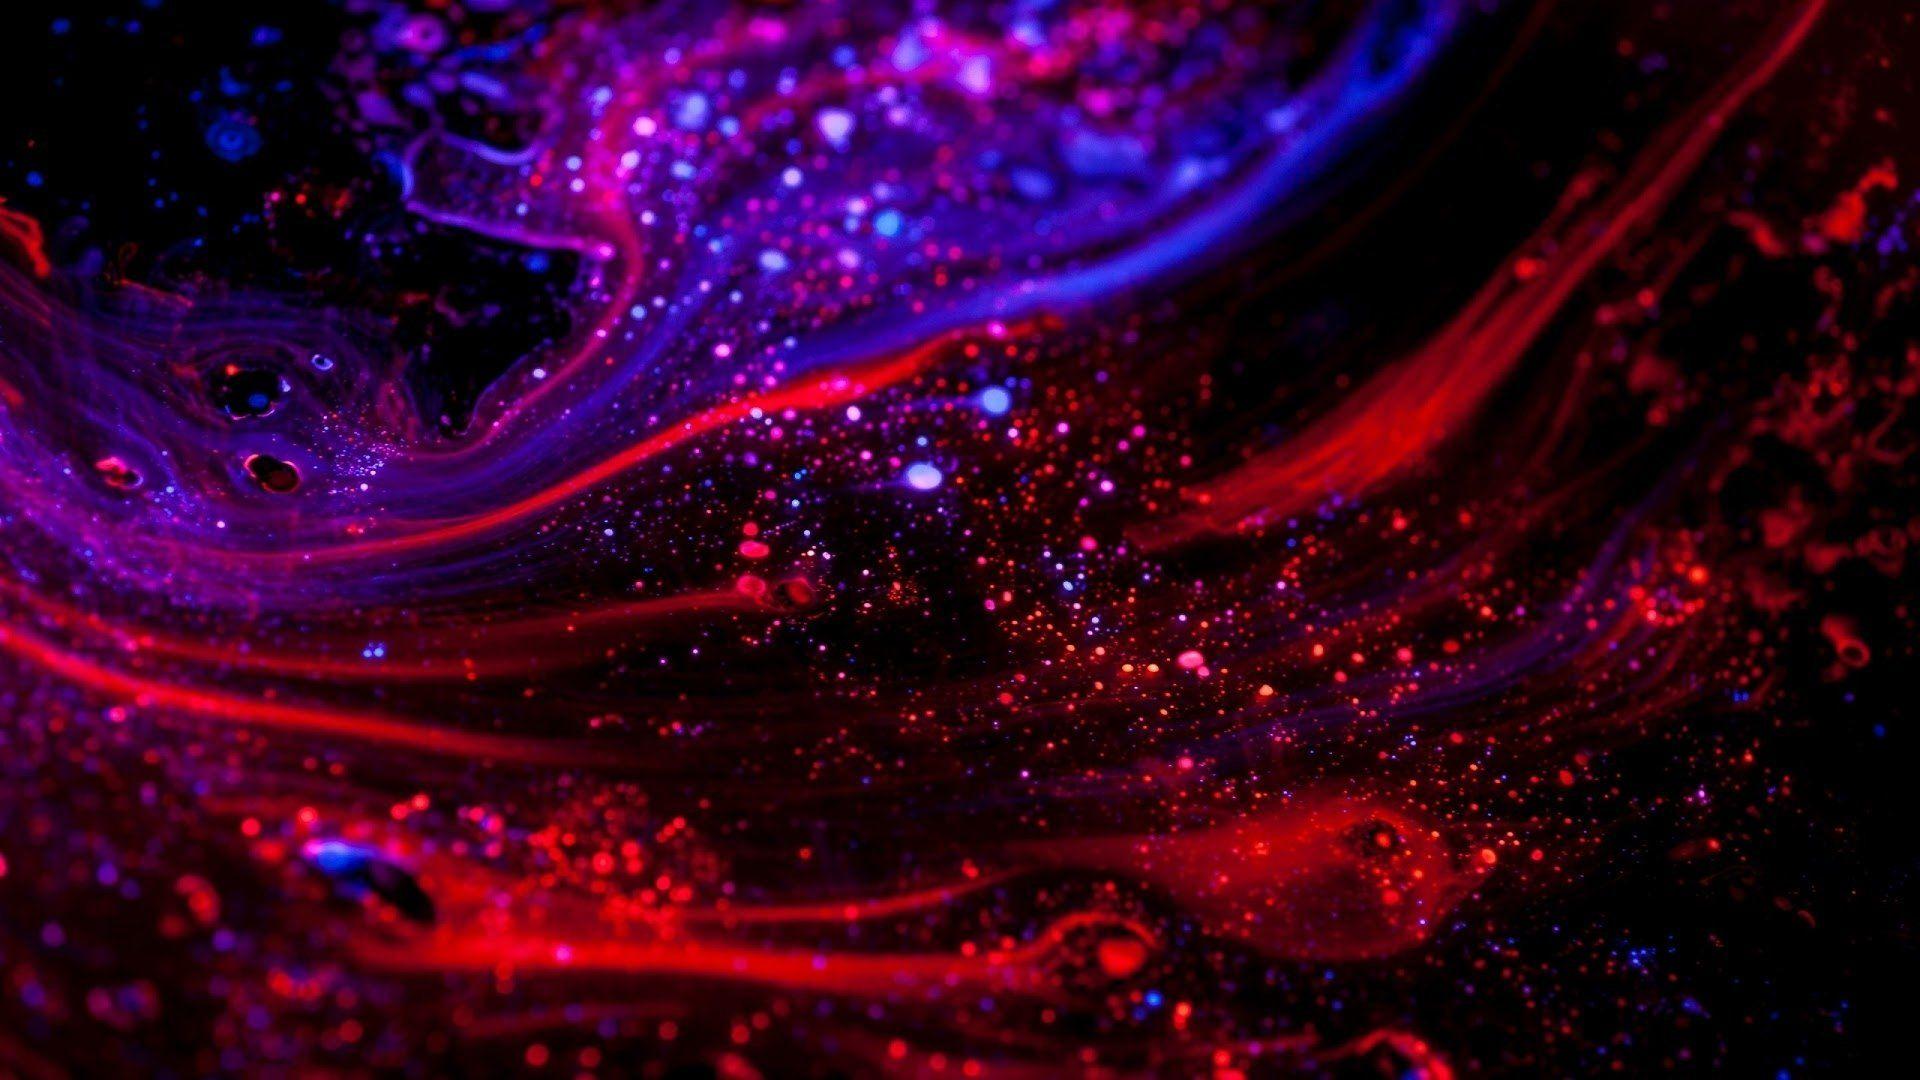 Abstract Liquid HD Wallpapers - Top Free Abstract Liquid HD Backgrounds